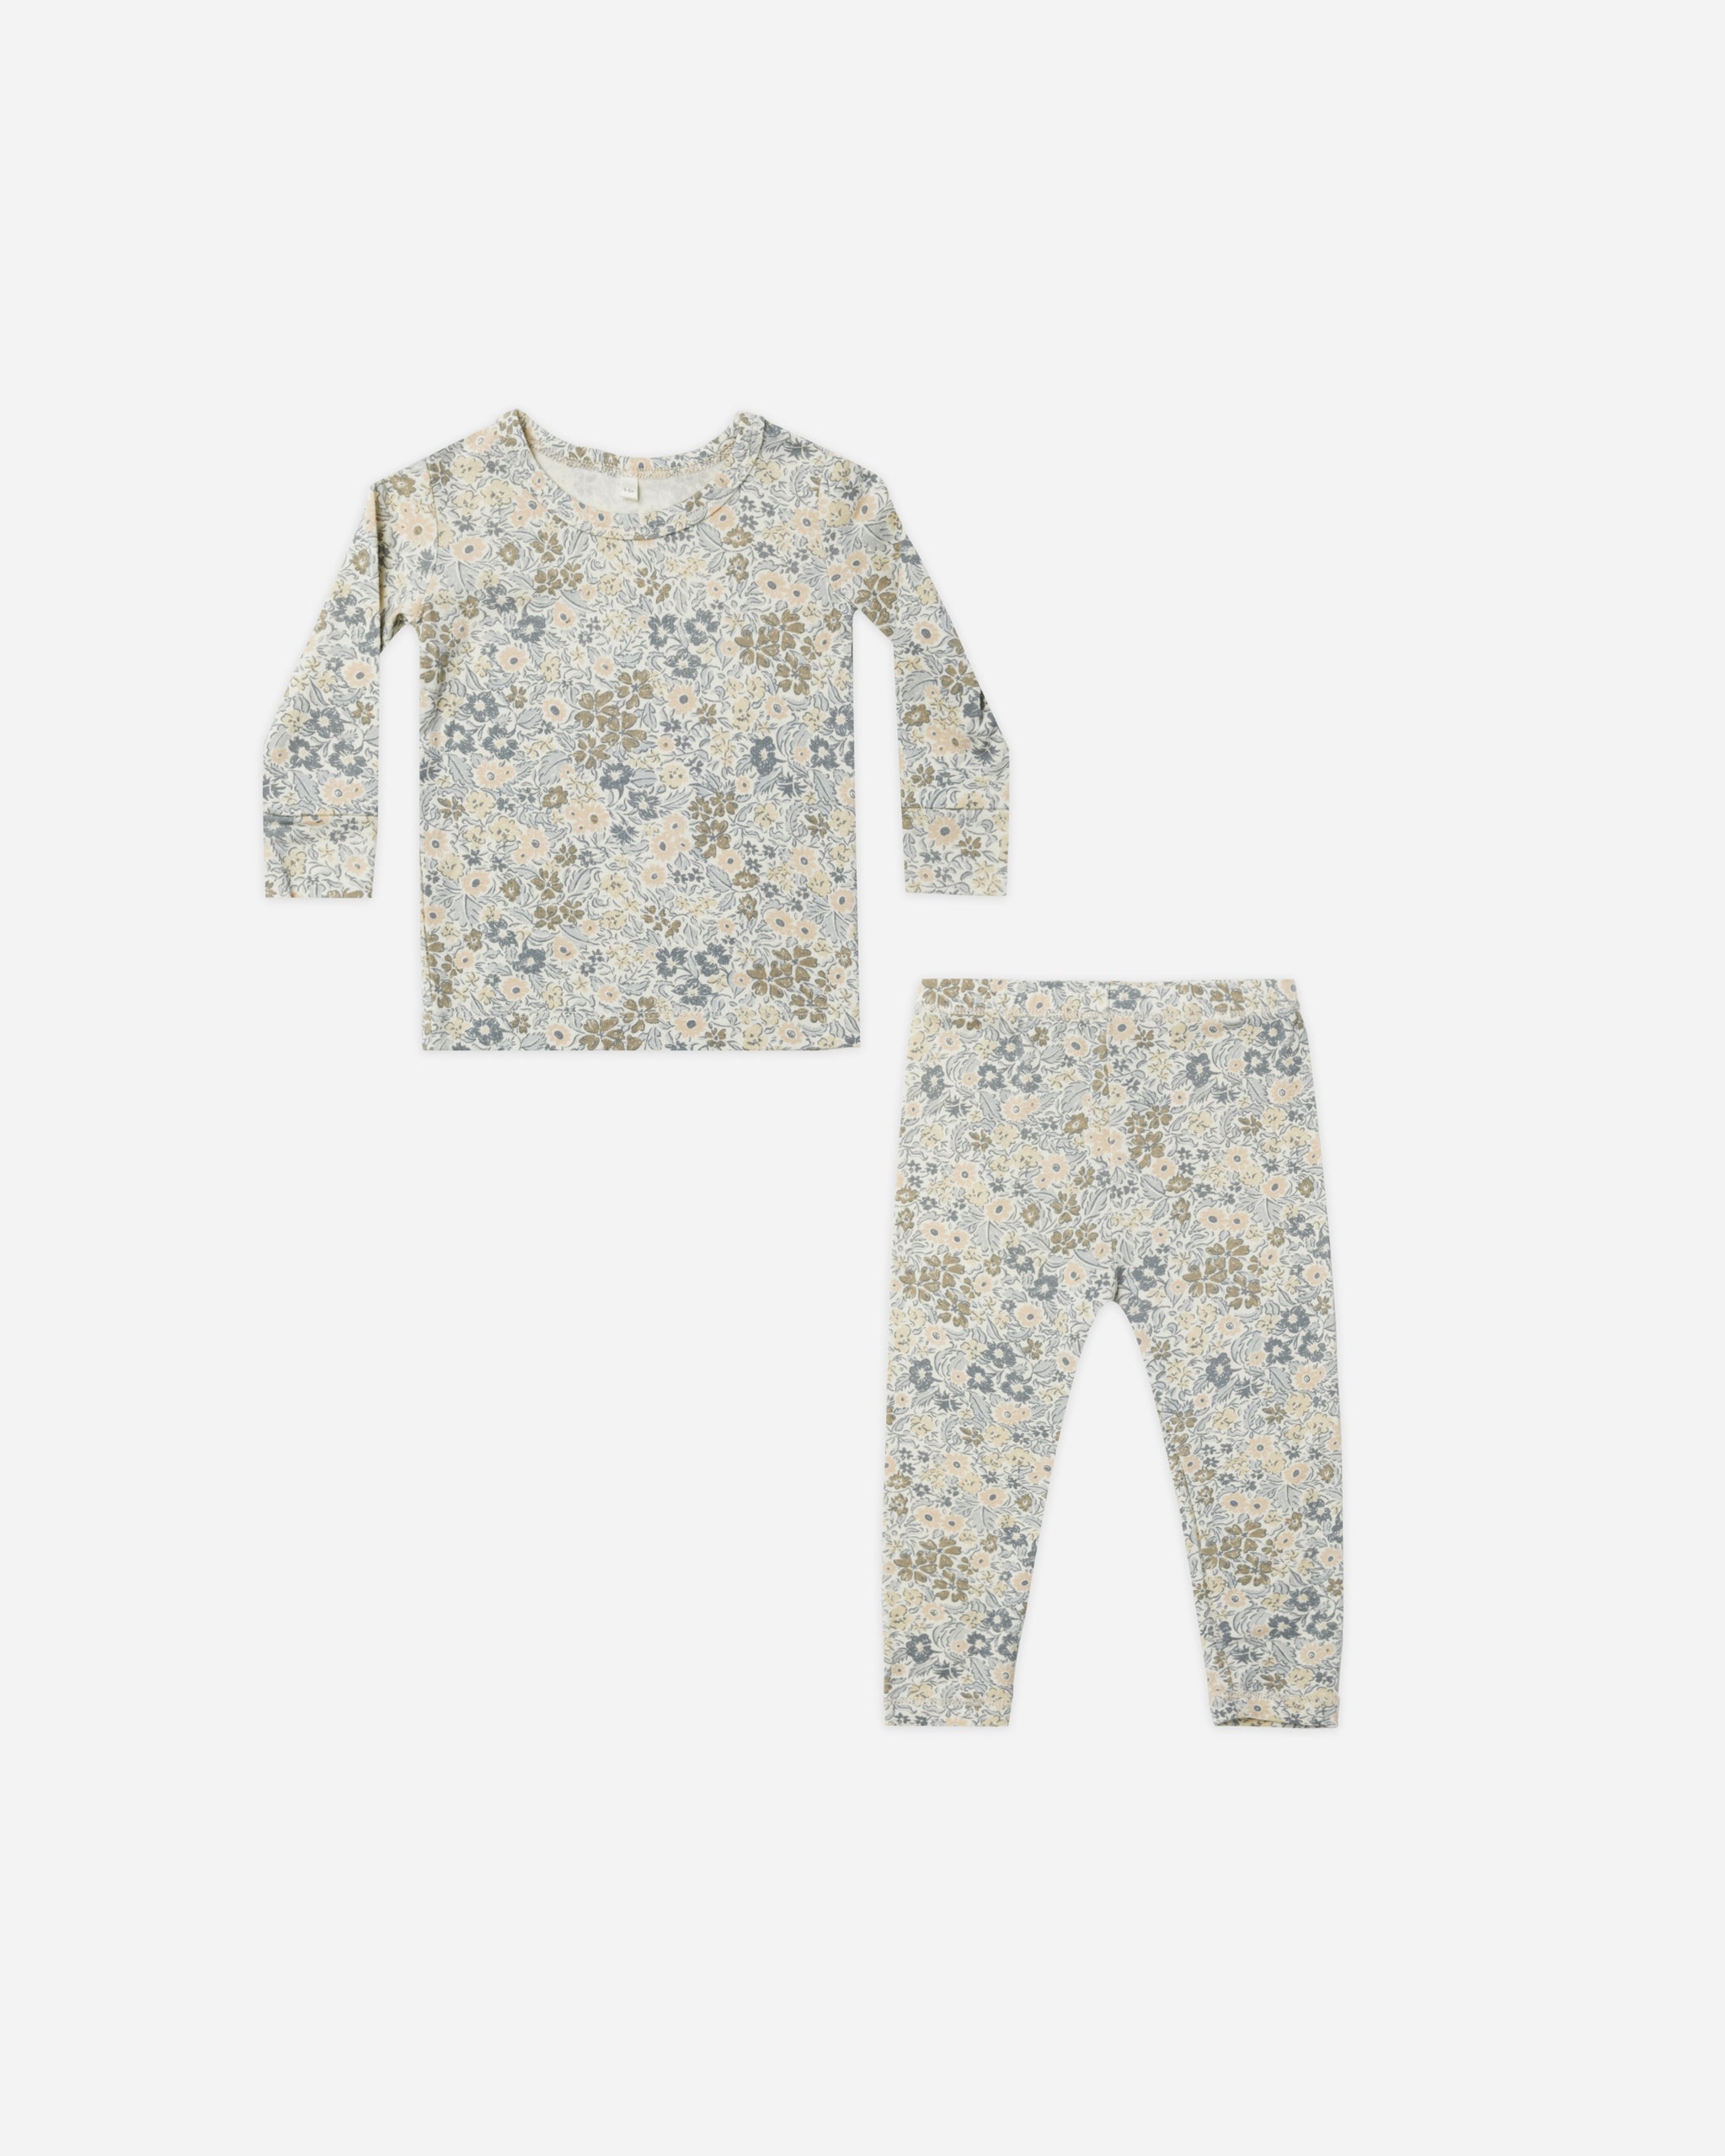 Bamboo Pajama Set || Winter Garden - Rylee + Cru | Kids Clothes | Trendy Baby Clothes | Modern Infant Outfits |